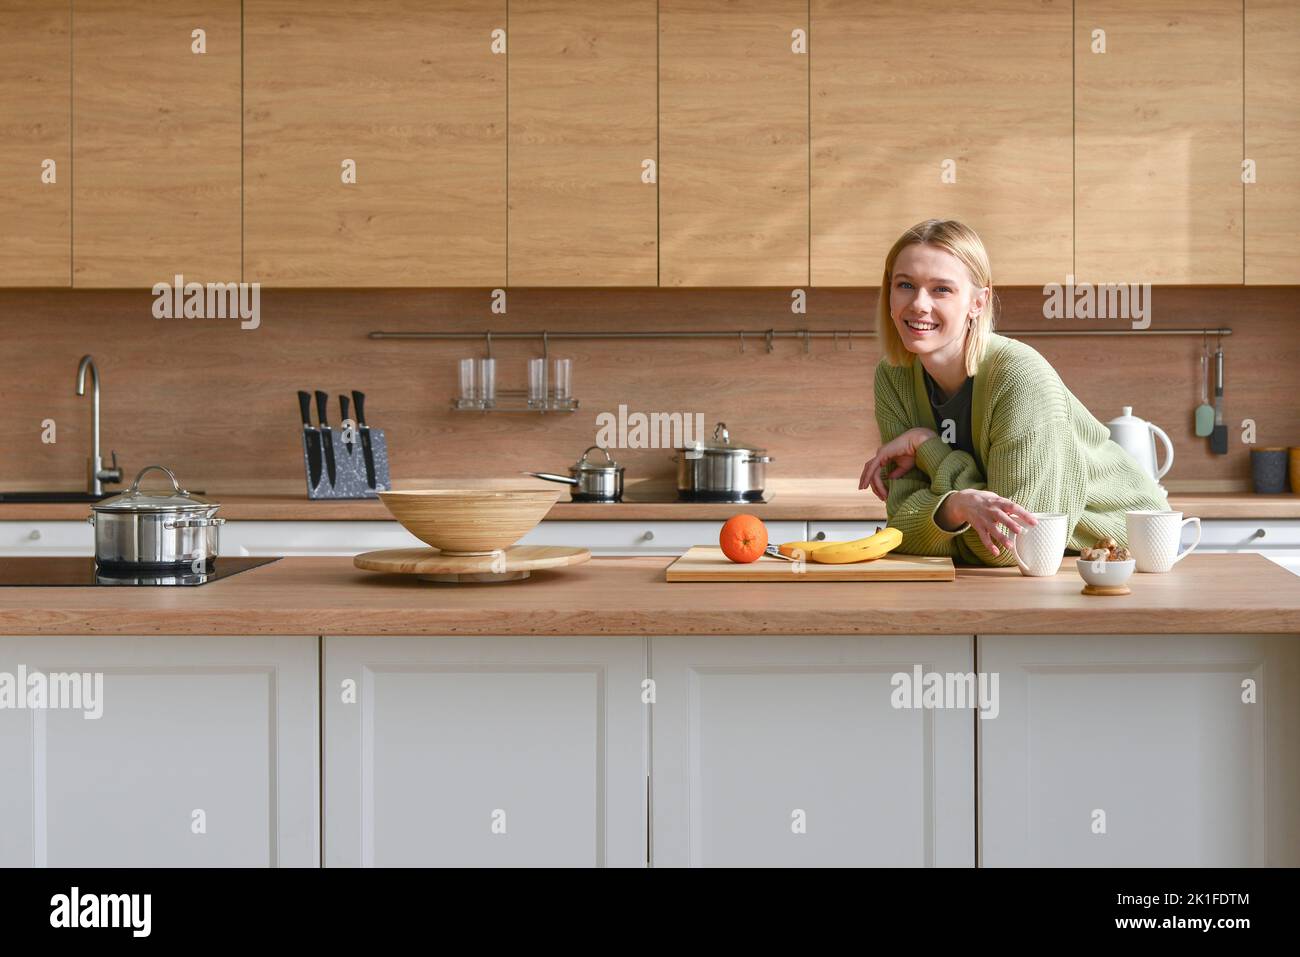 Portrait of a young woman at home in kitchen looking at camera with smile. Stock Photo